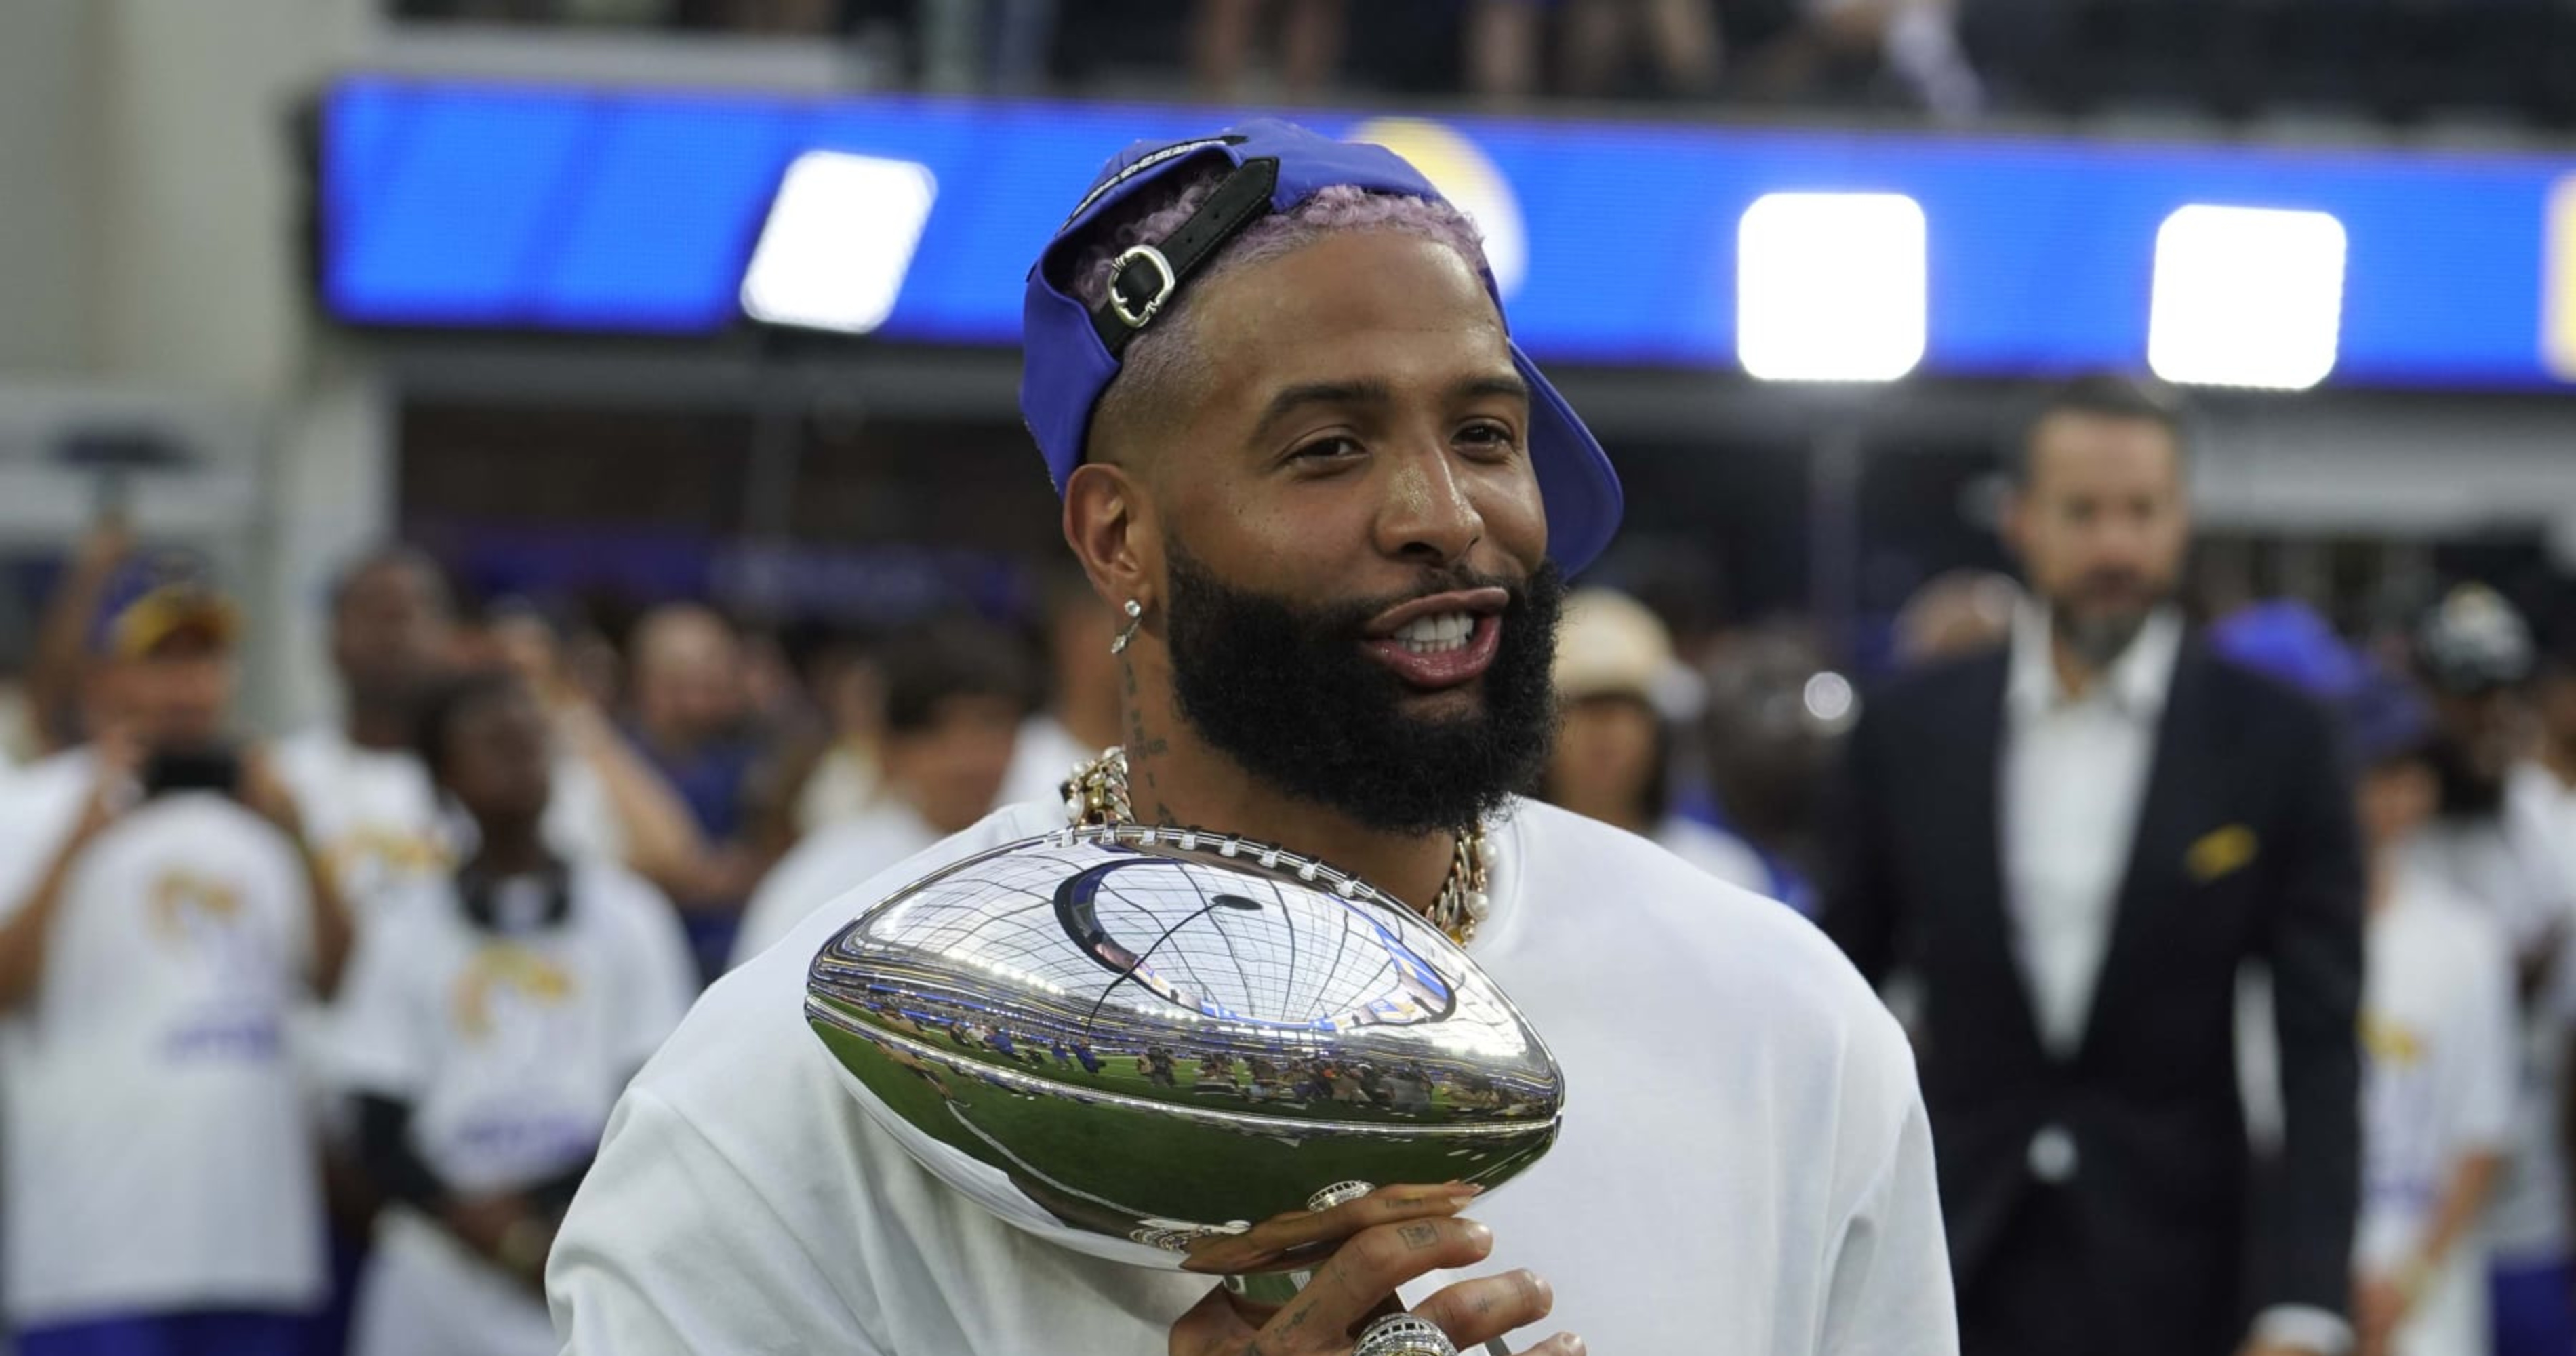 Baltimore Ravens agree to 1-year deal with Odell Beckham Jr